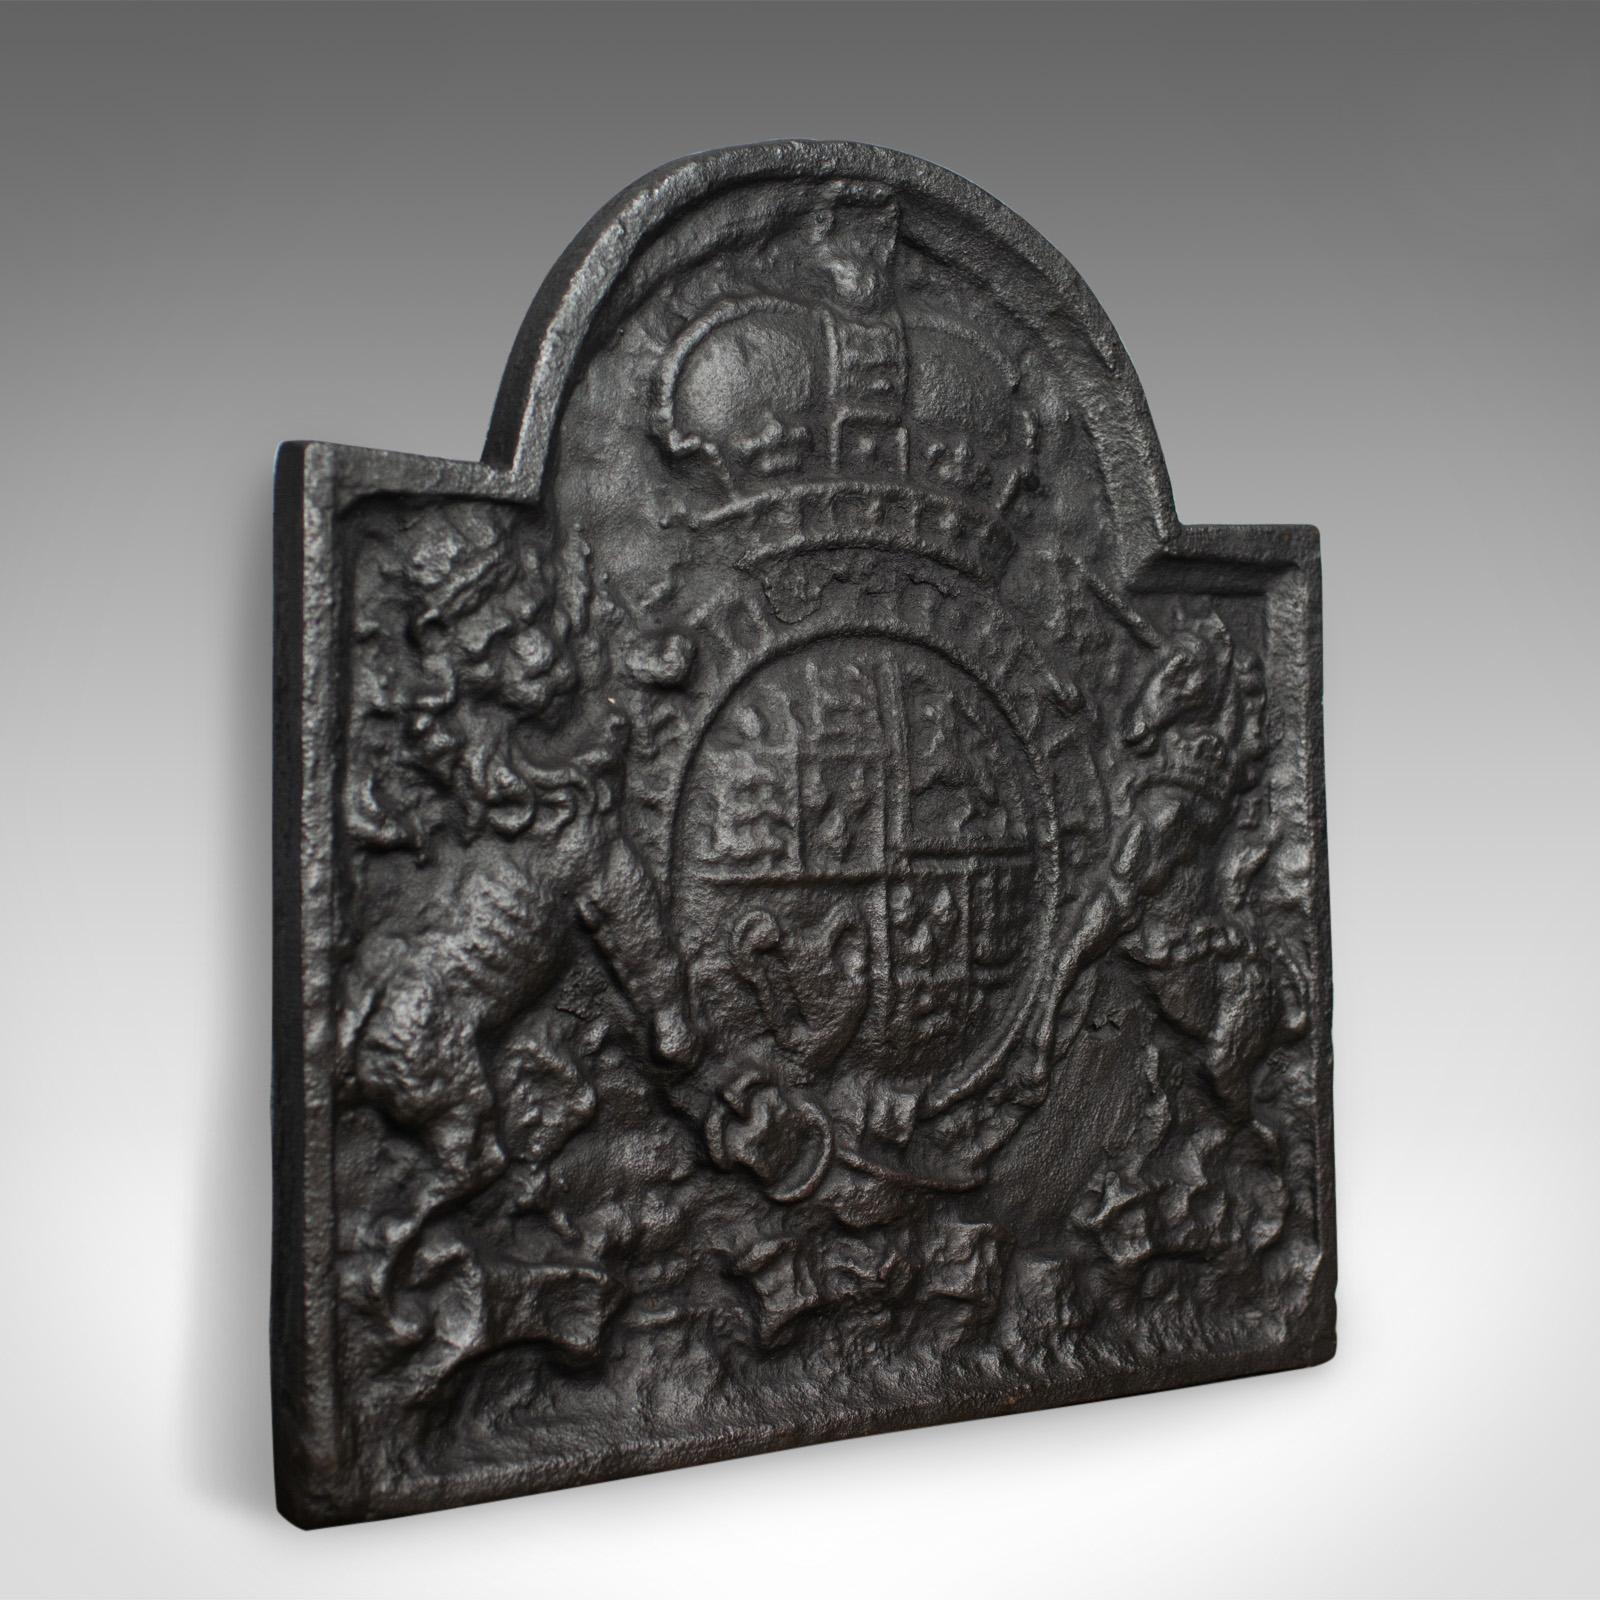 This is a cast iron fire back displaying the royal crest. A heavy fire plate to back a fireplace and retain heat. A revival casting crafted in the late 20th century.

Heavy fire back in cast iron with a graphite finish
Shaped top over oblong